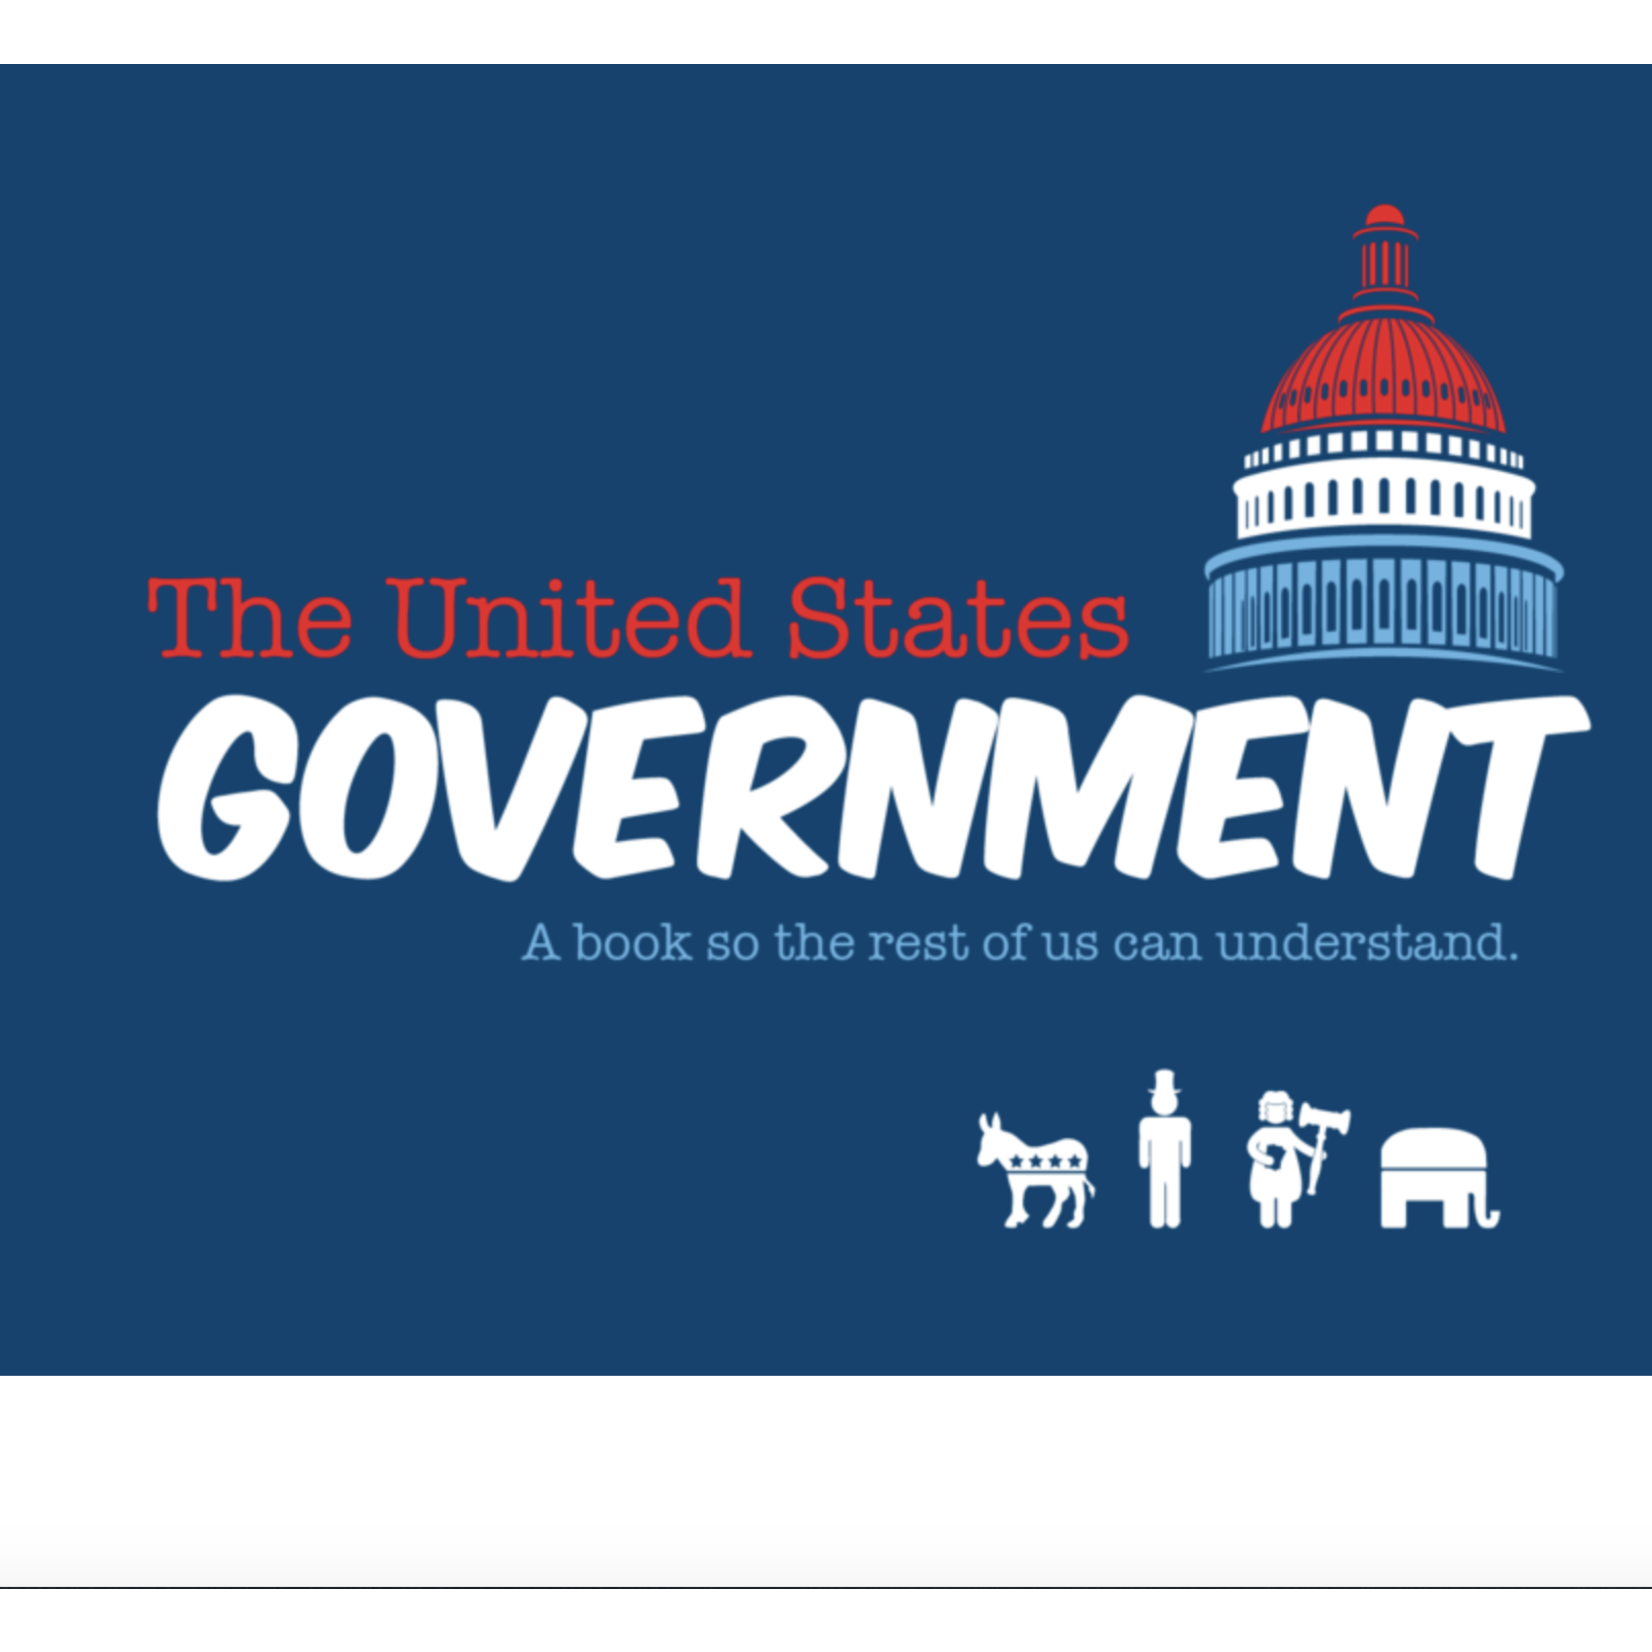 Book - The United States Government